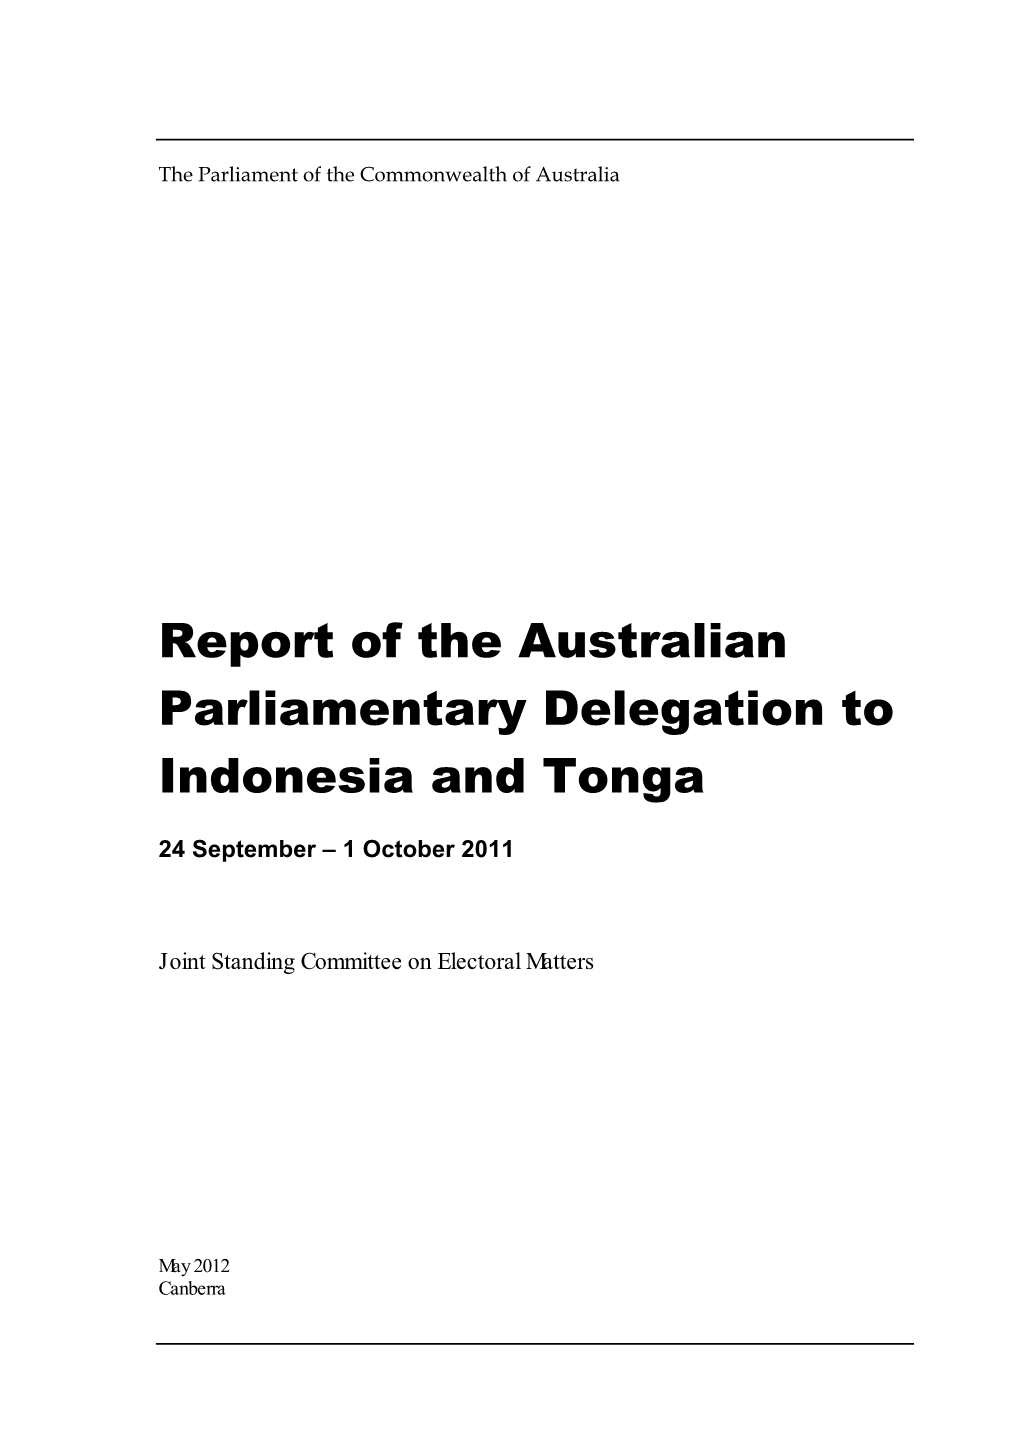 Report of the Australian Parliamentary Delegation to Indonesia and Tonga